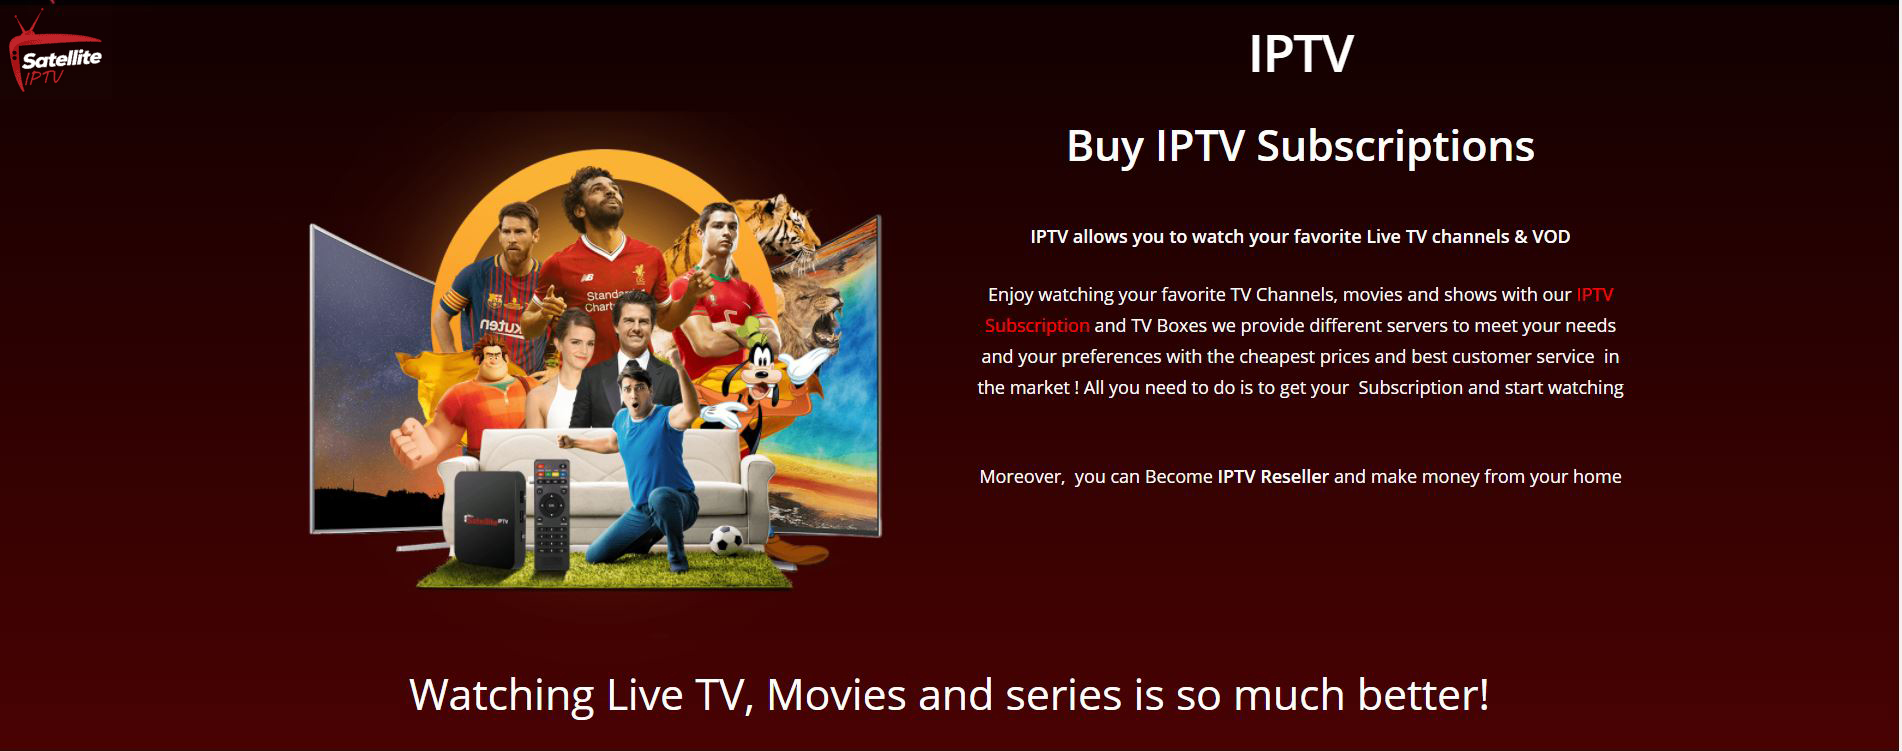 watch IPTV on my smart projector or home theater system